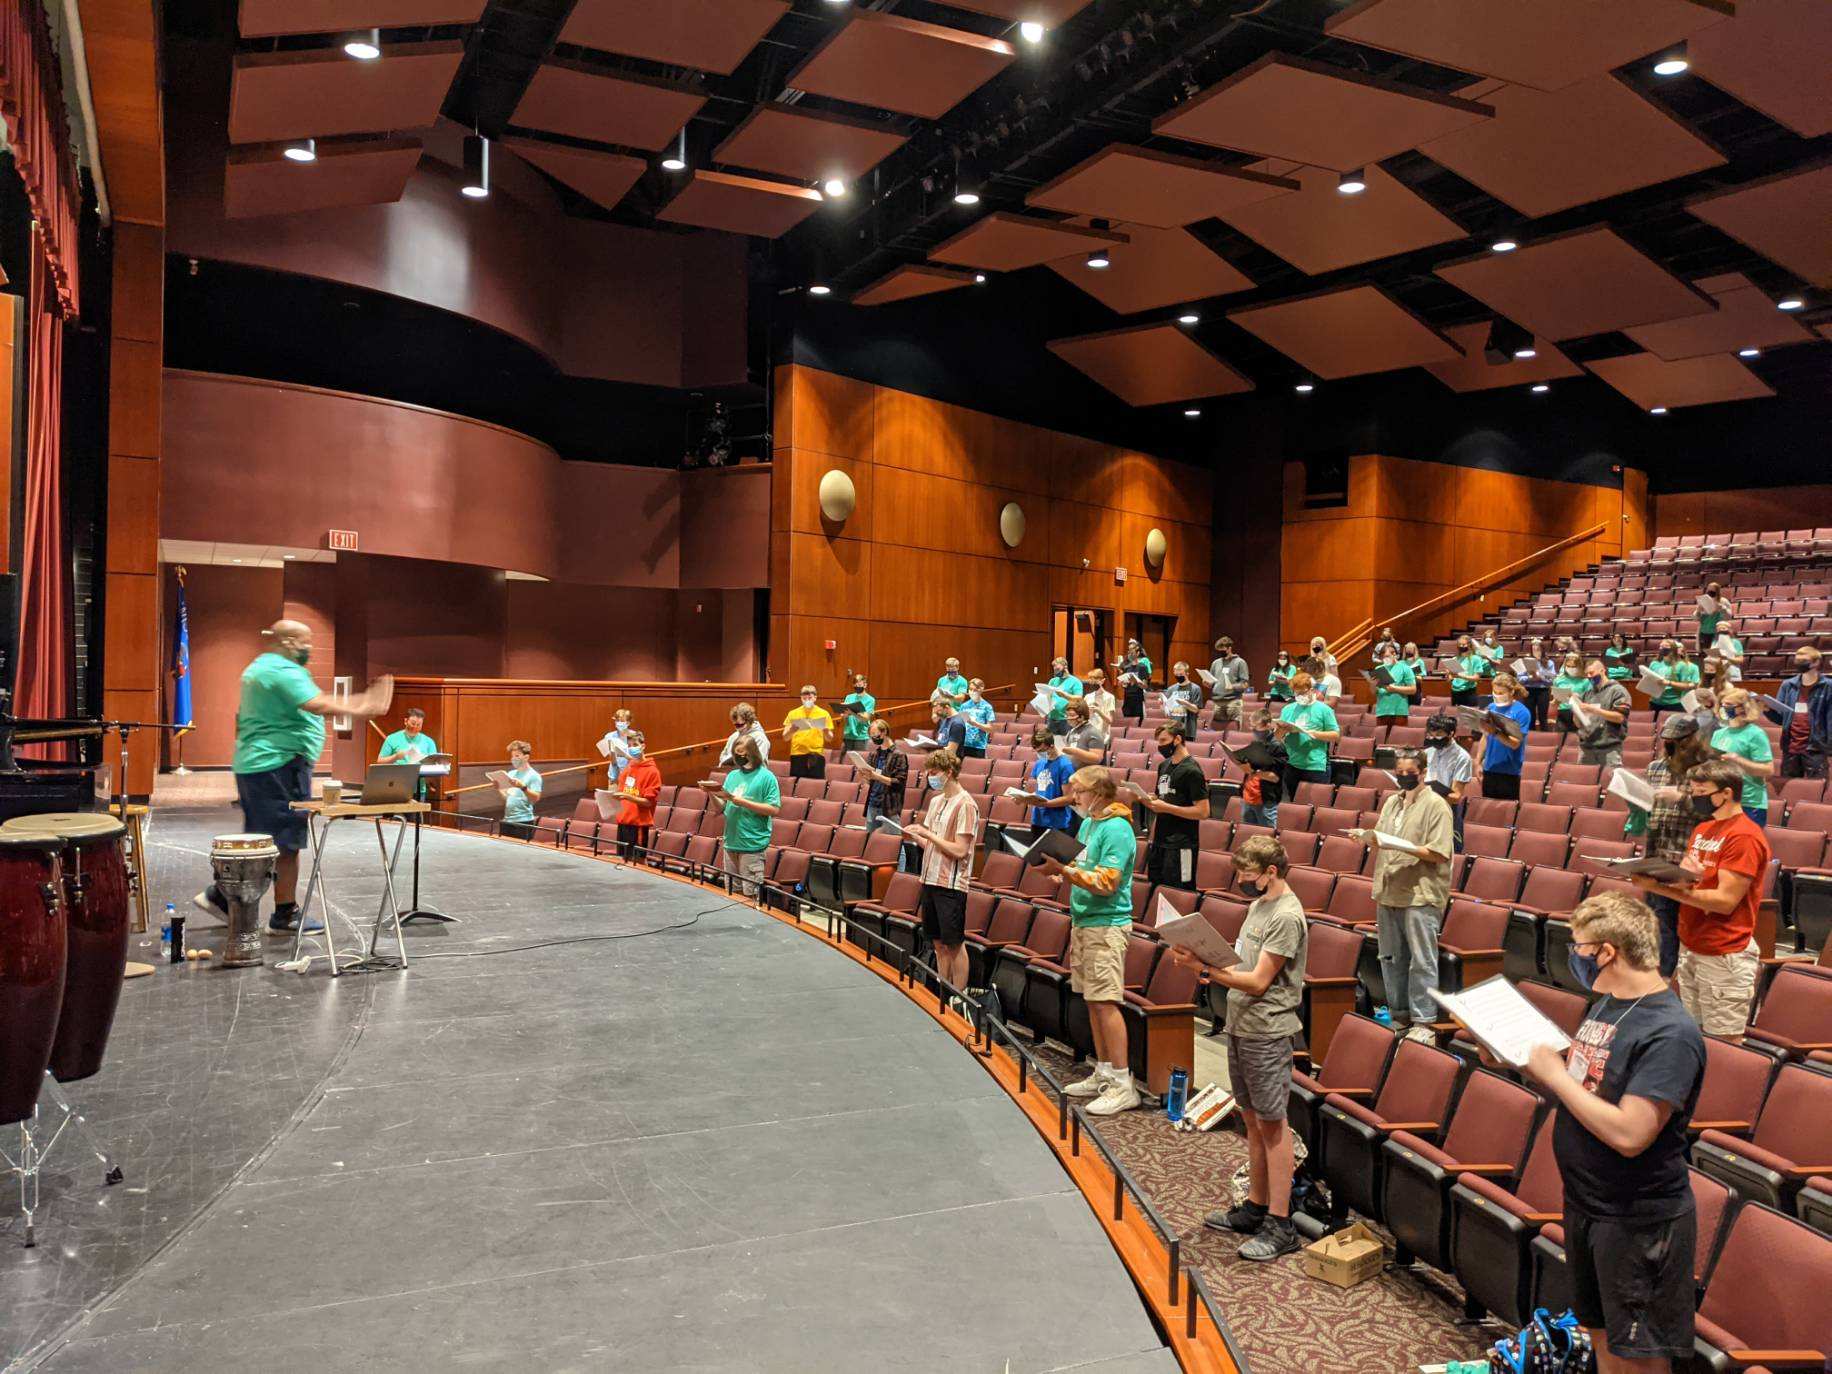 The 2021 WSMA Mixed Choir practicing in an auditorium